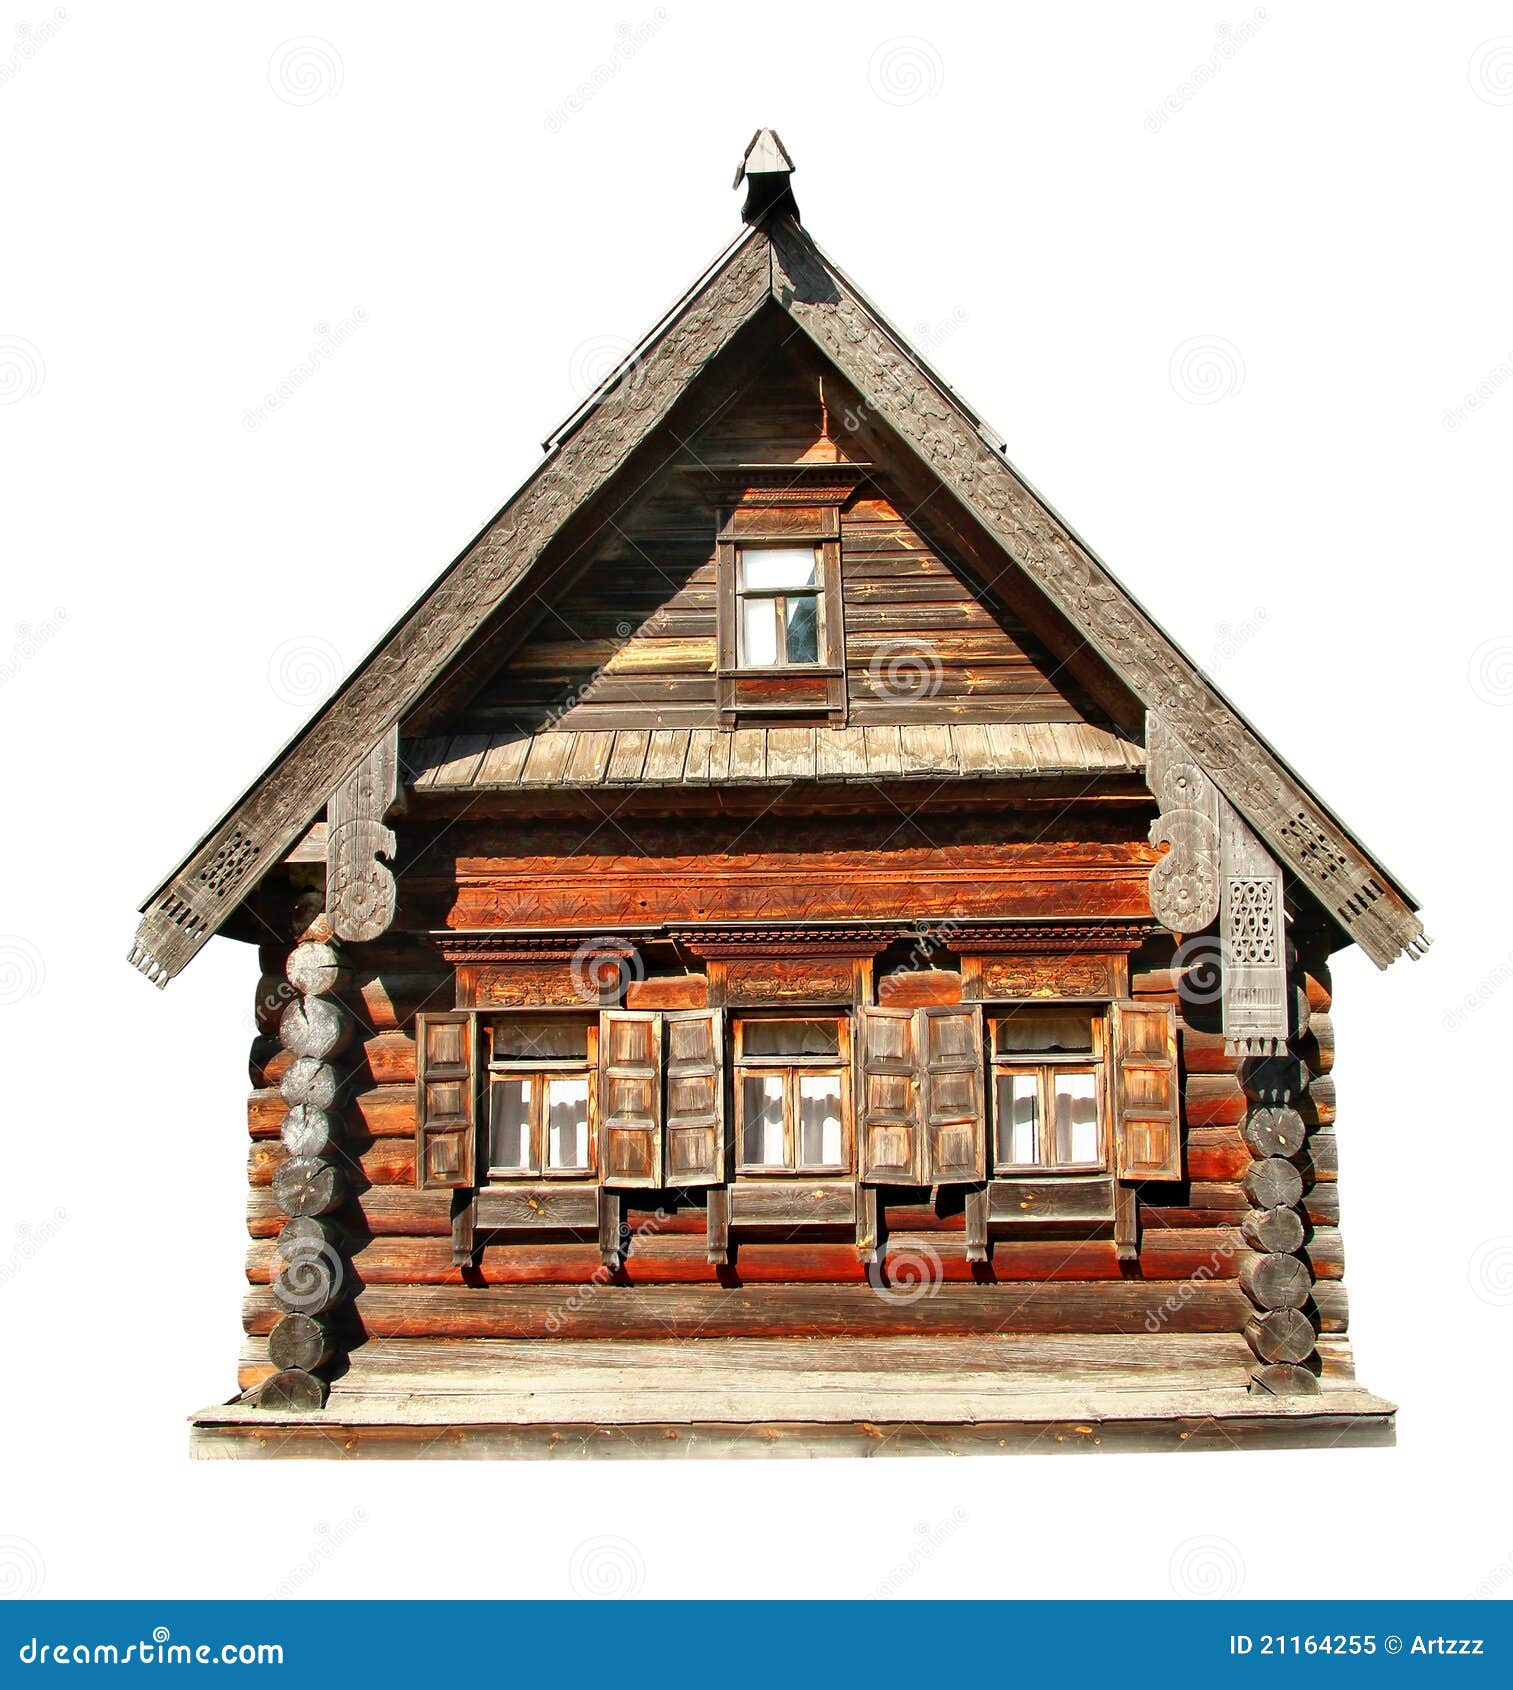 wood house clipart - photo #36